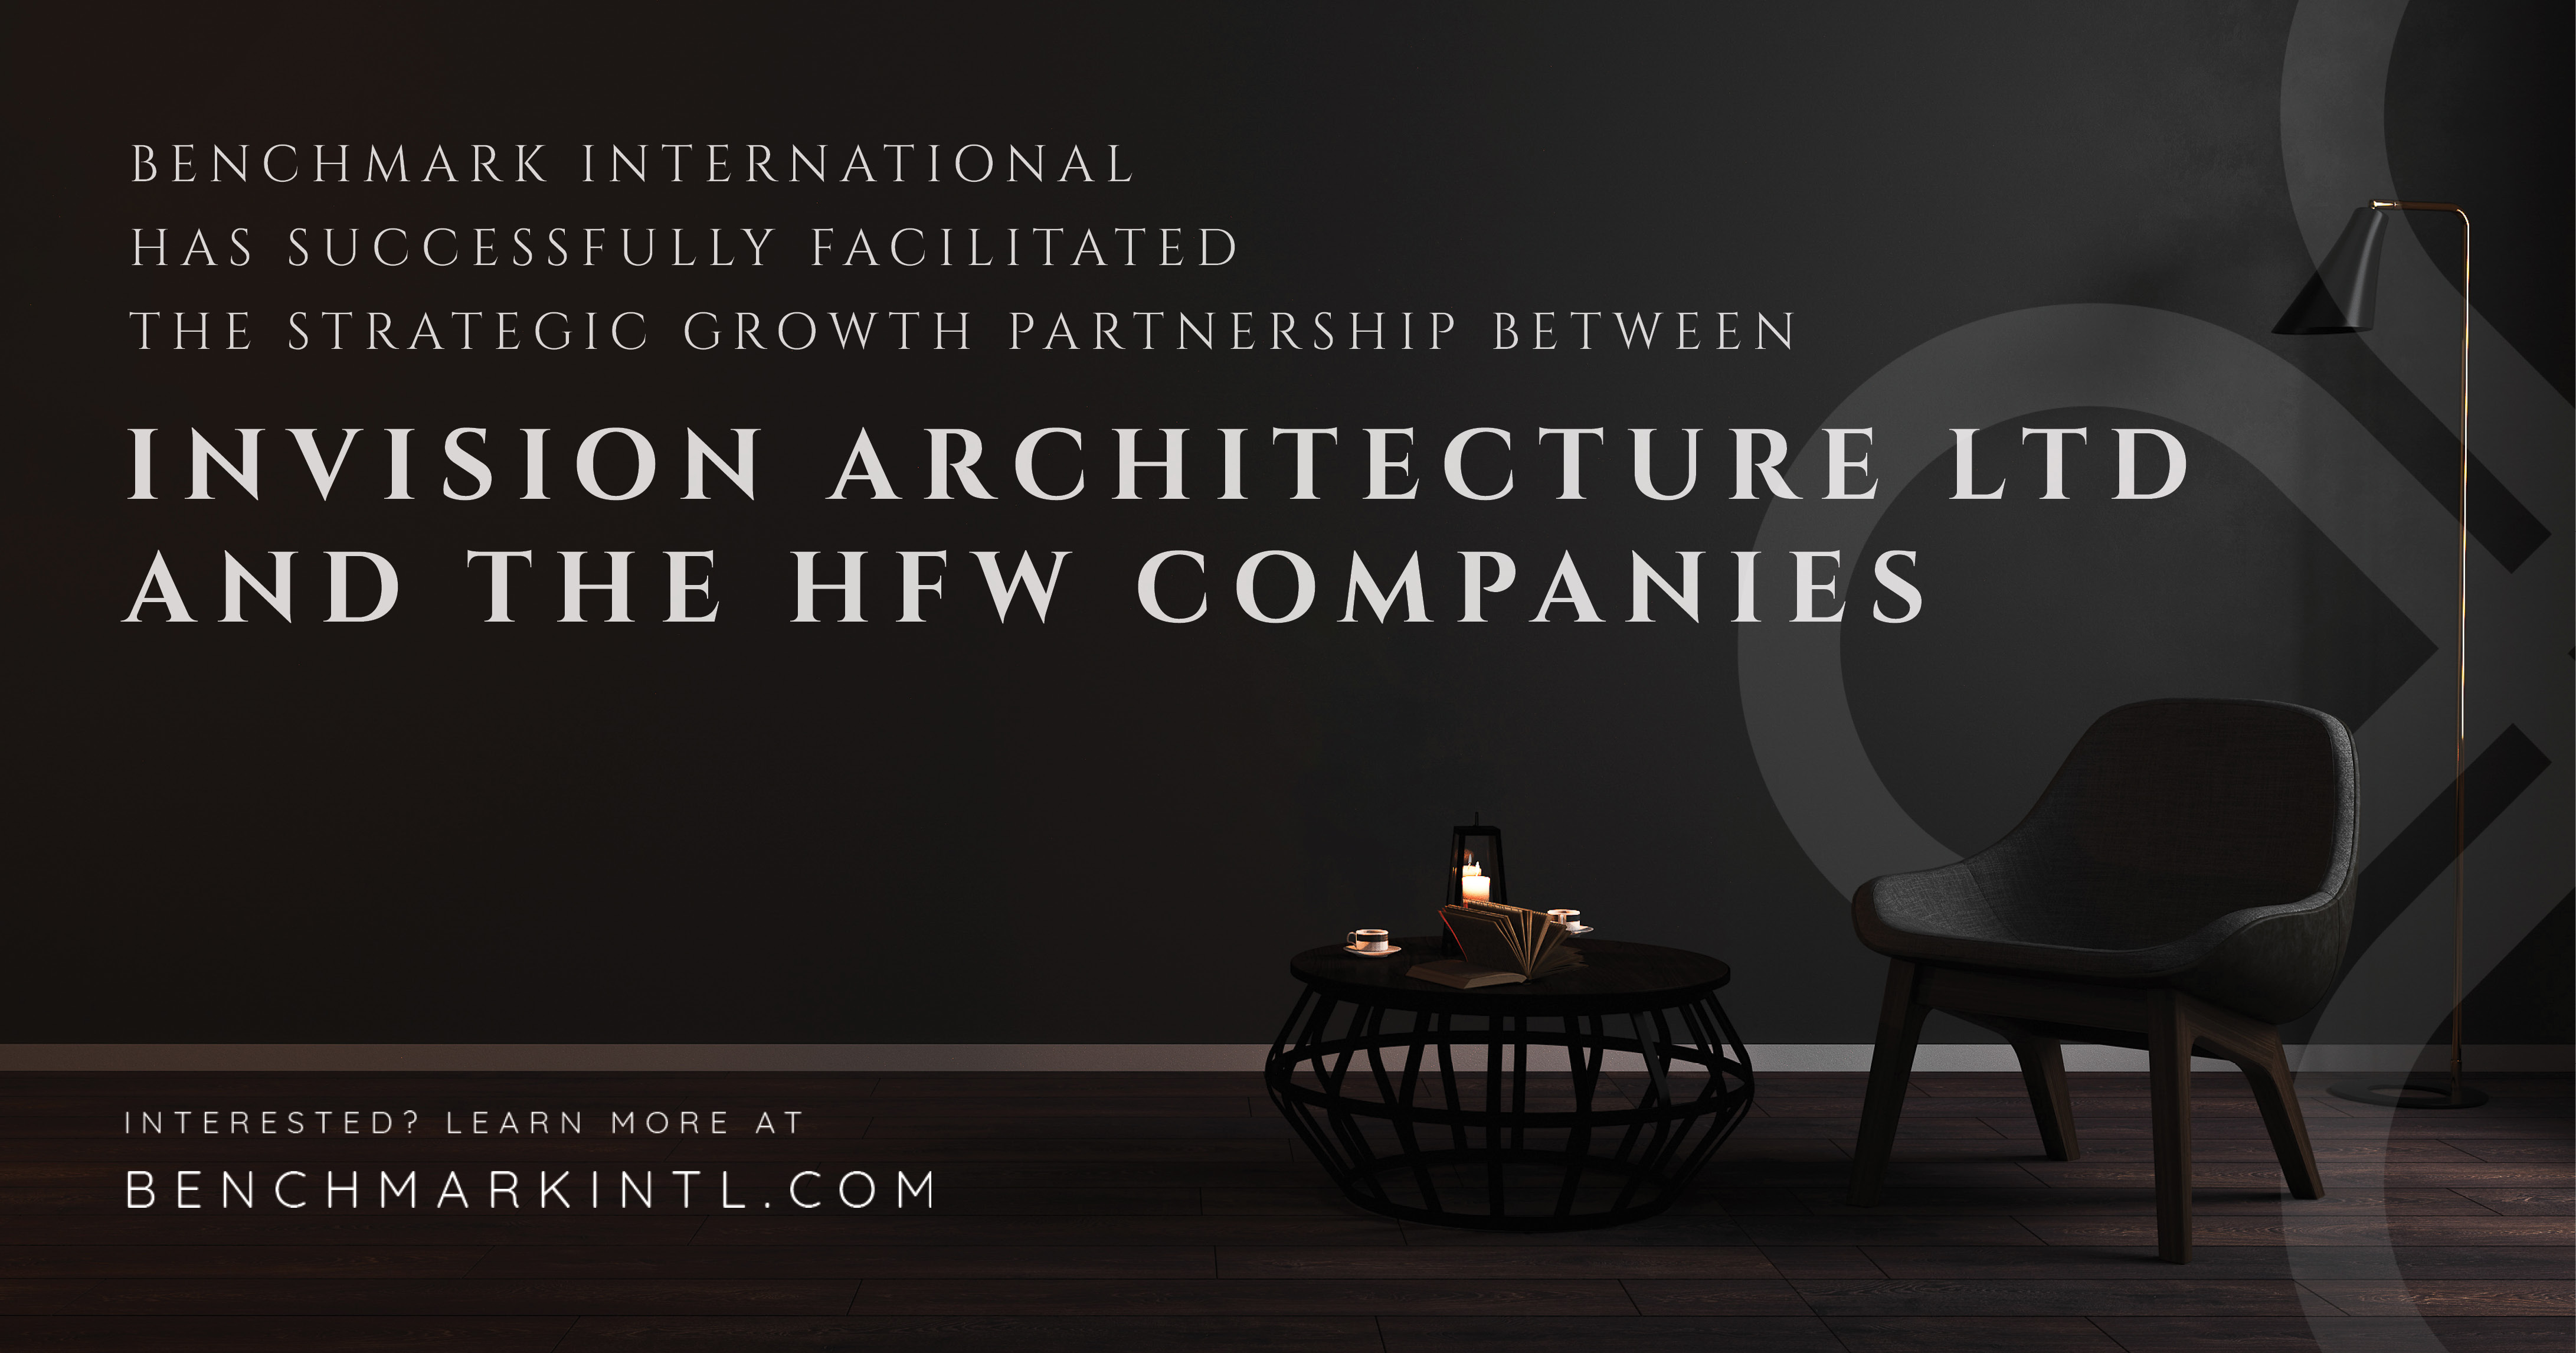 Benchmark International Facilitated The Strategic Growth Partnership Of Invision Architecture Ltd and The HFW Companies